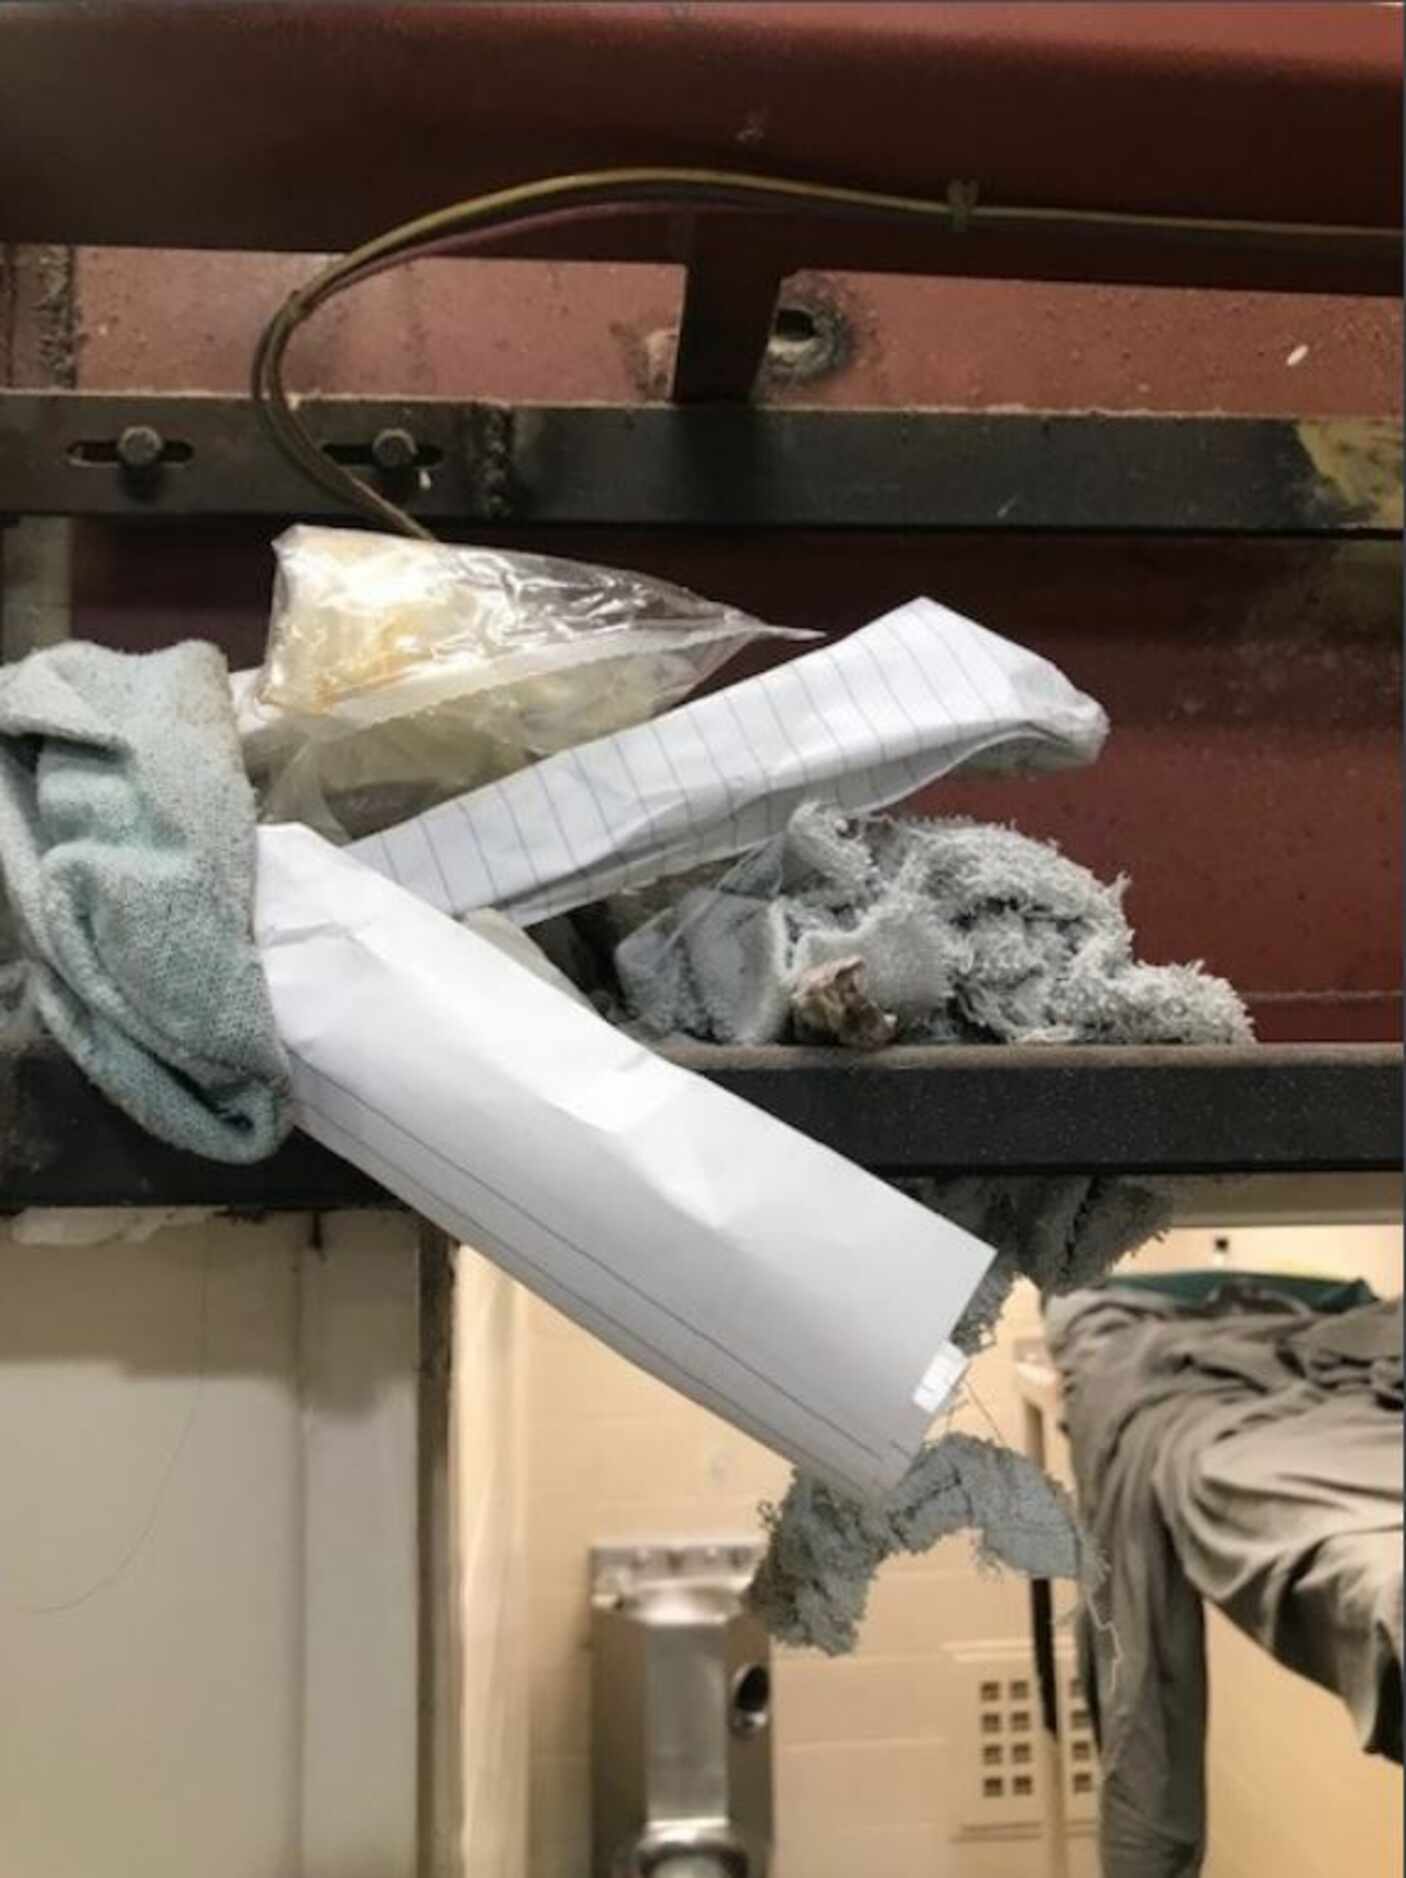 Paper and rags that were jammed into a cell door mechanism overhead. County staff removed...